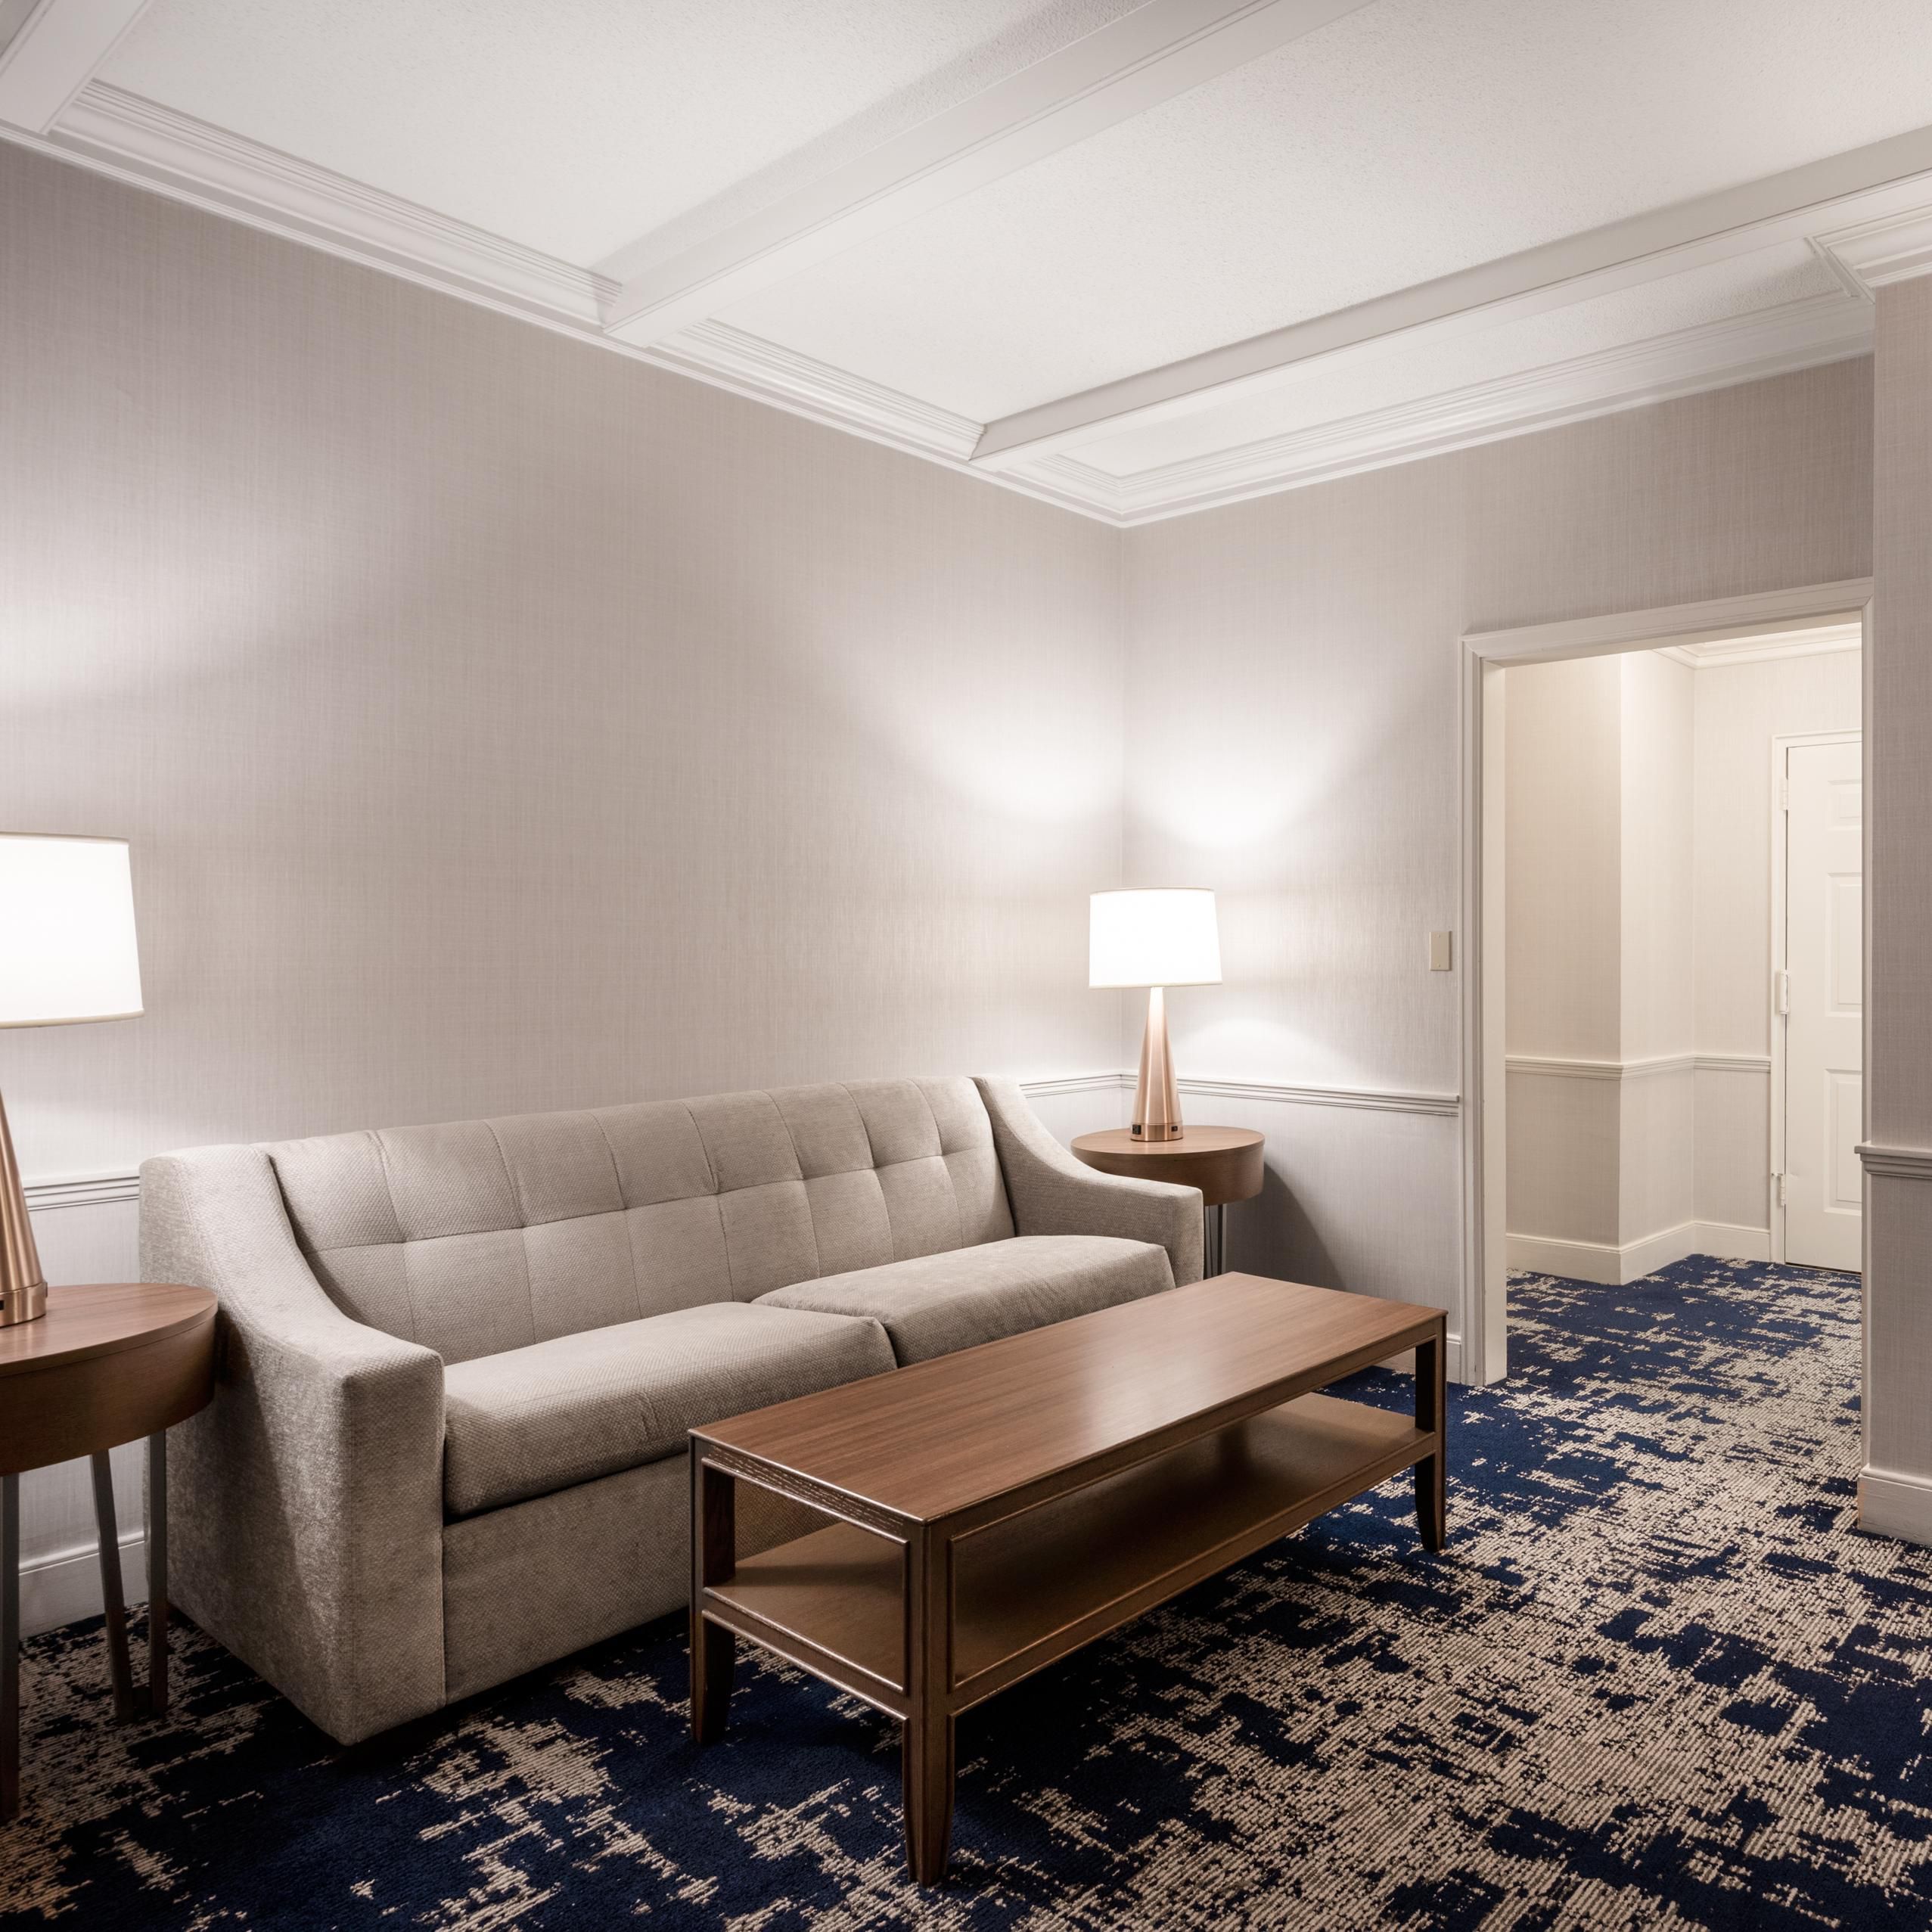 Our spacious Junior Suite features a separate sitting area